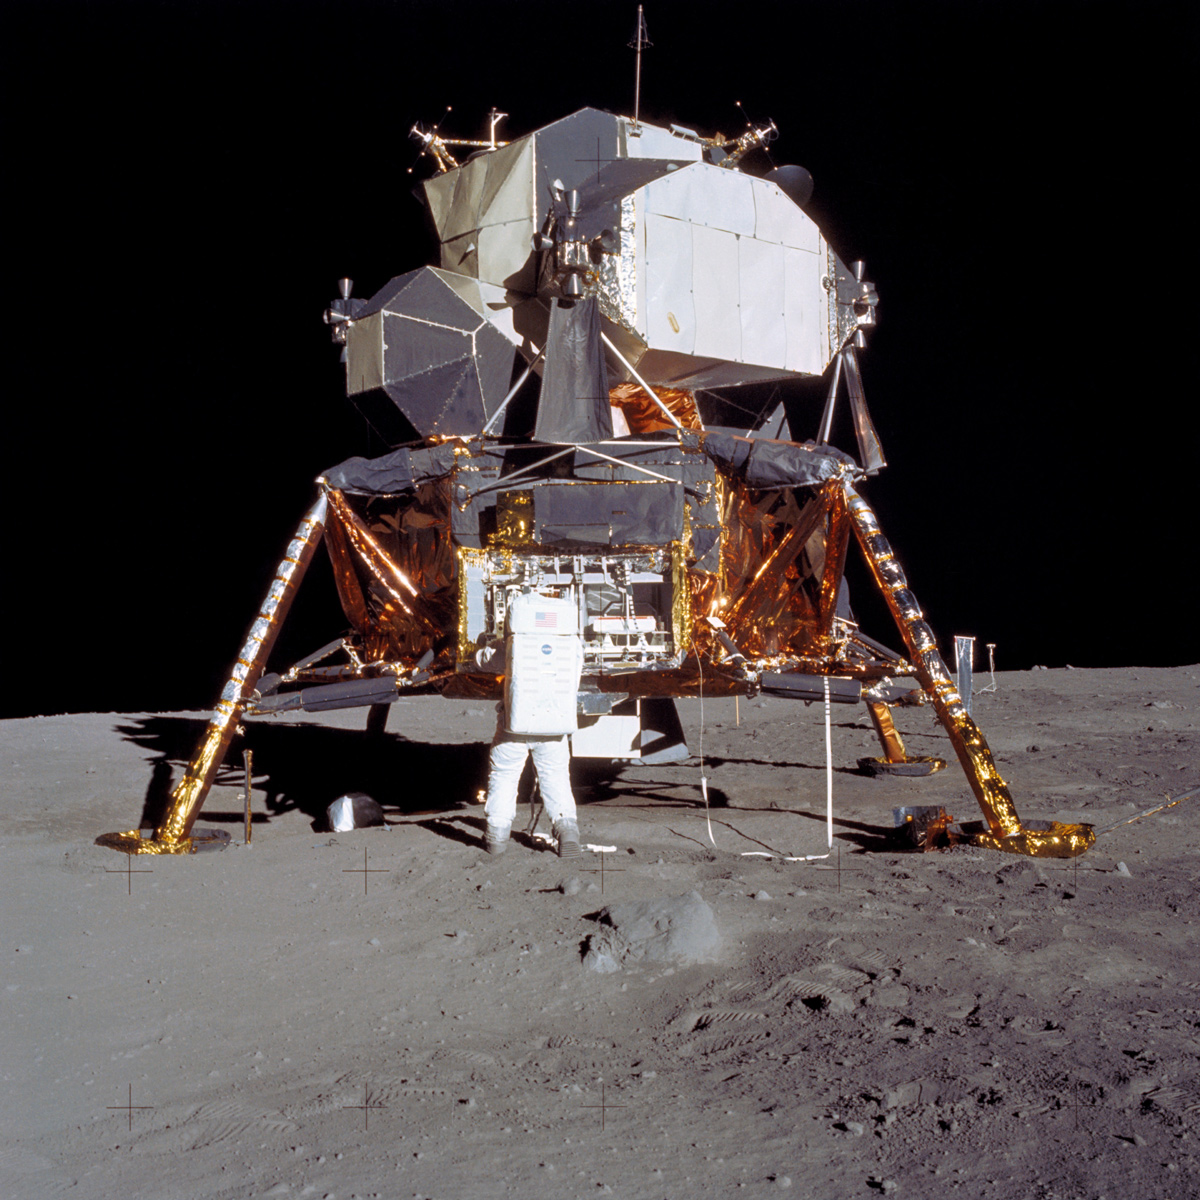 Lunar module on surface of Moon, with astronaut in foreground facing away from viewer